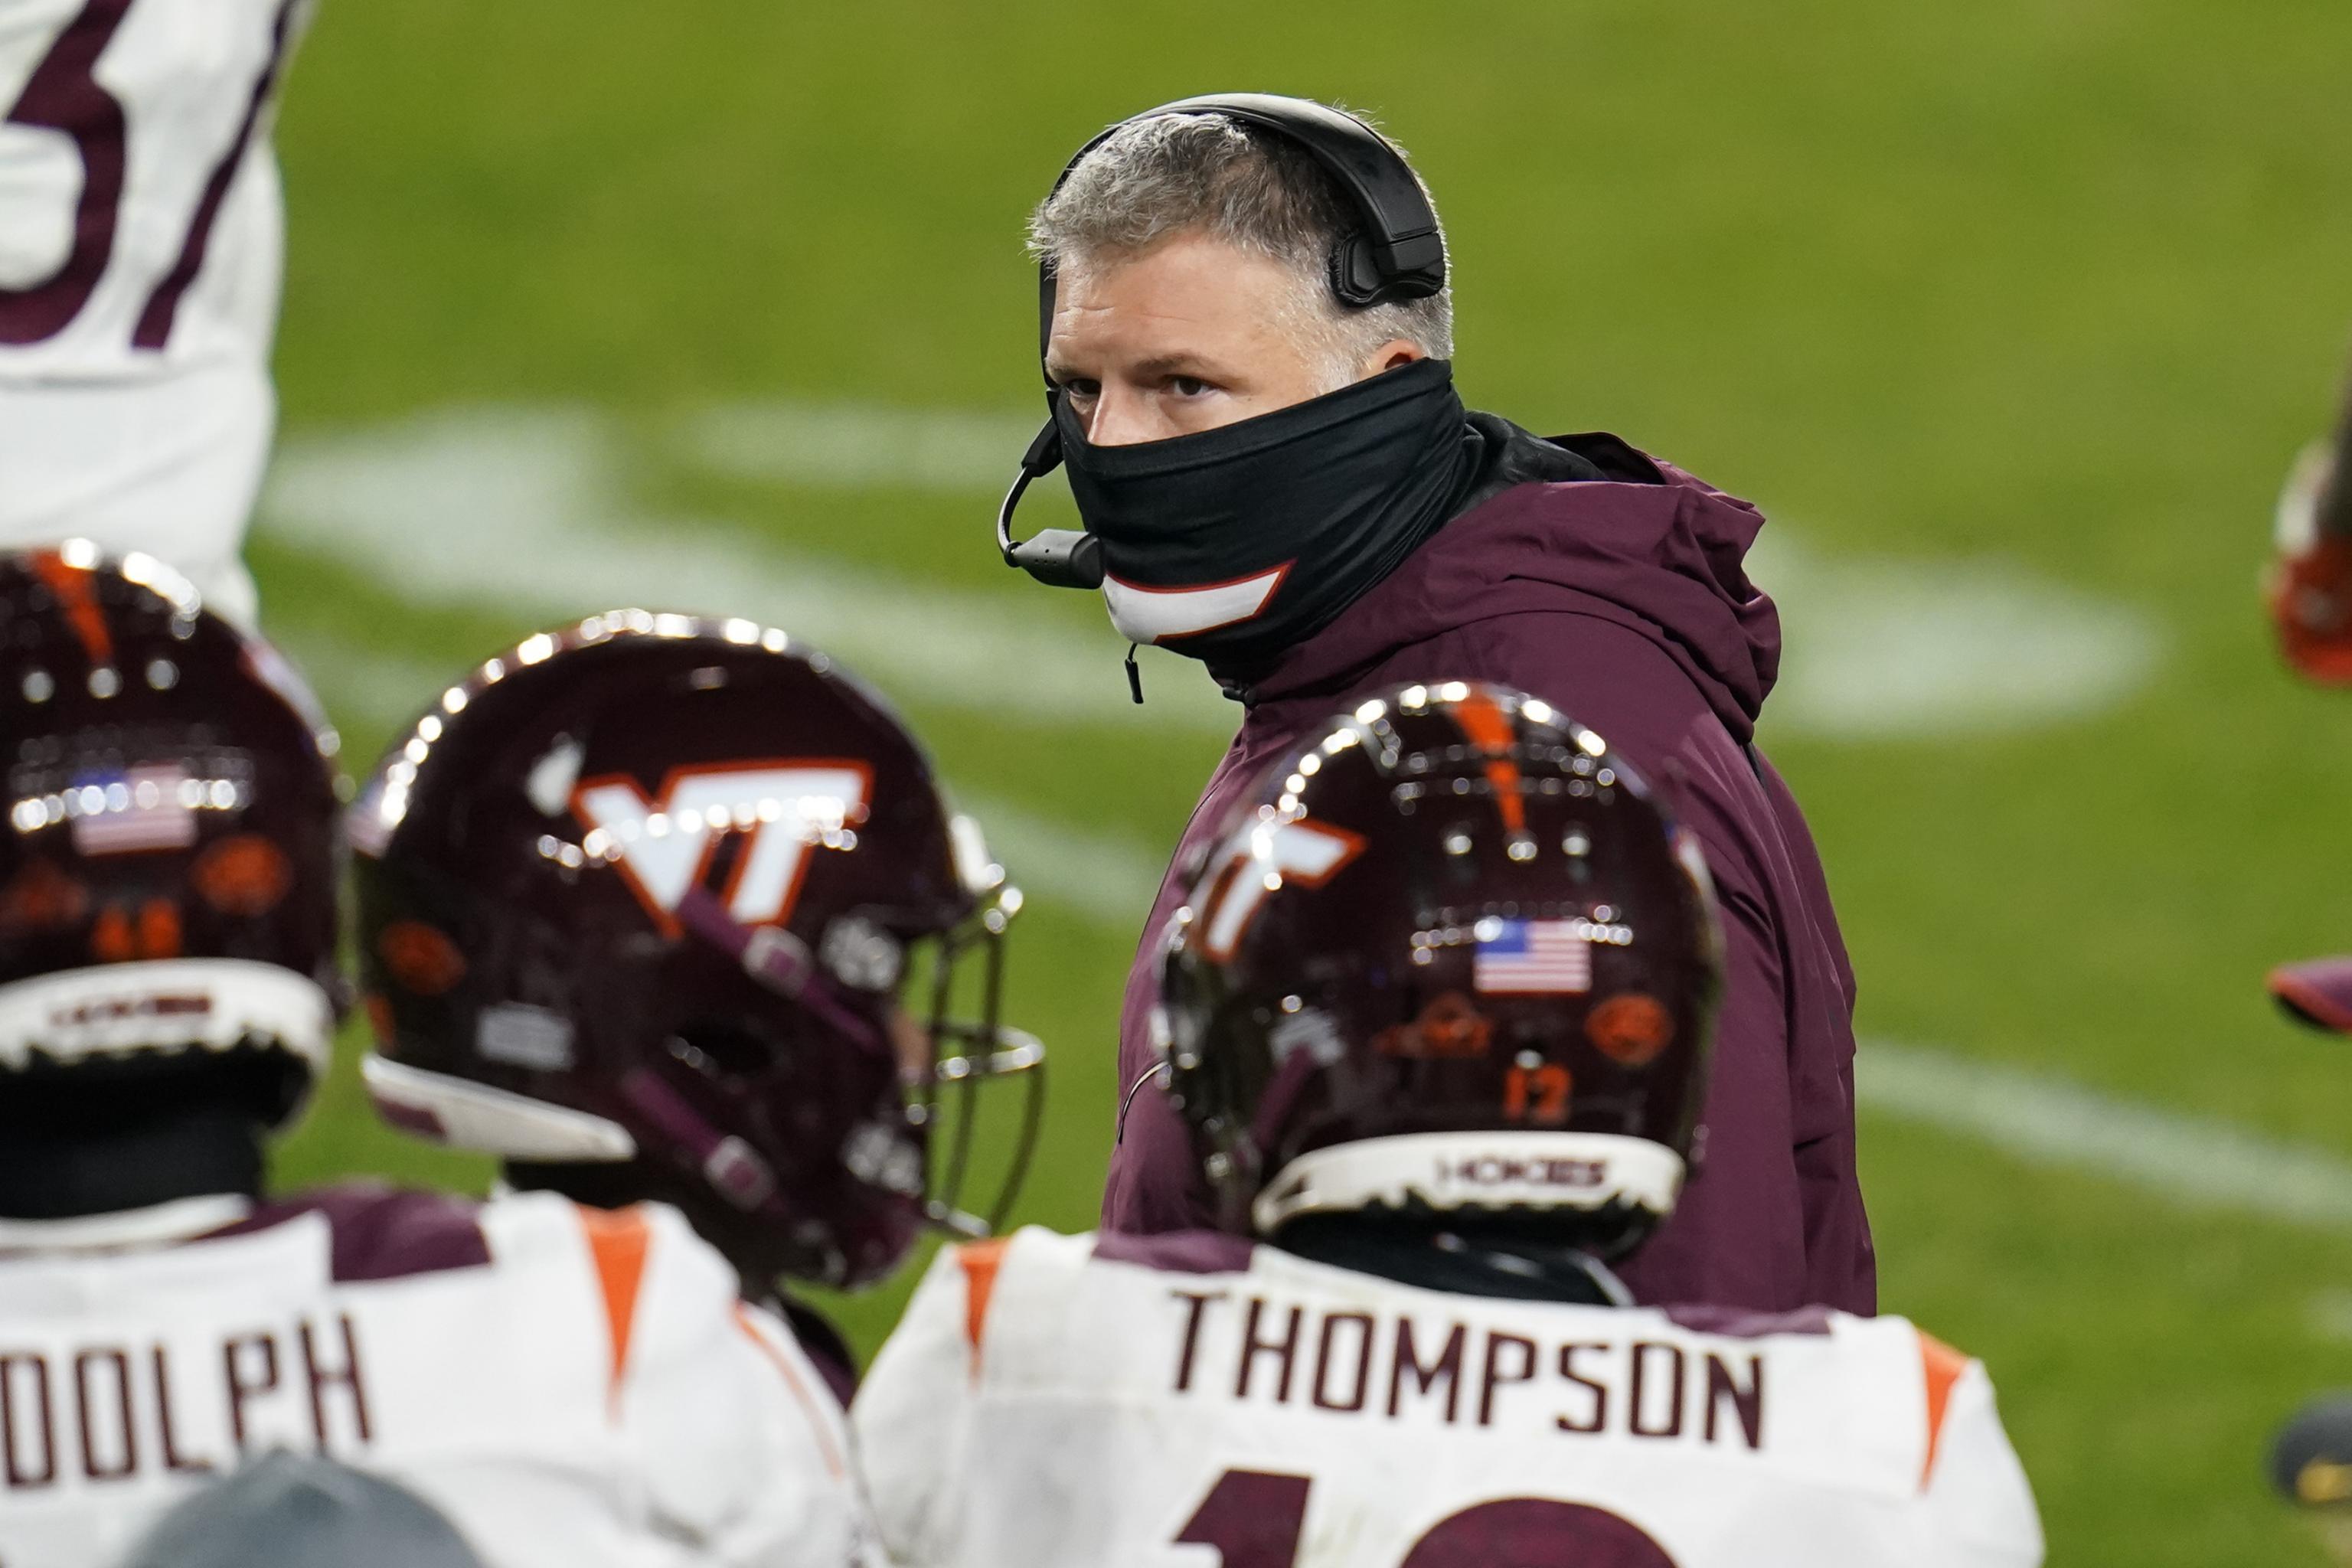 Virginia Tech Opts Out of Bowl Game, Ends Longest Active Bowl Streak at